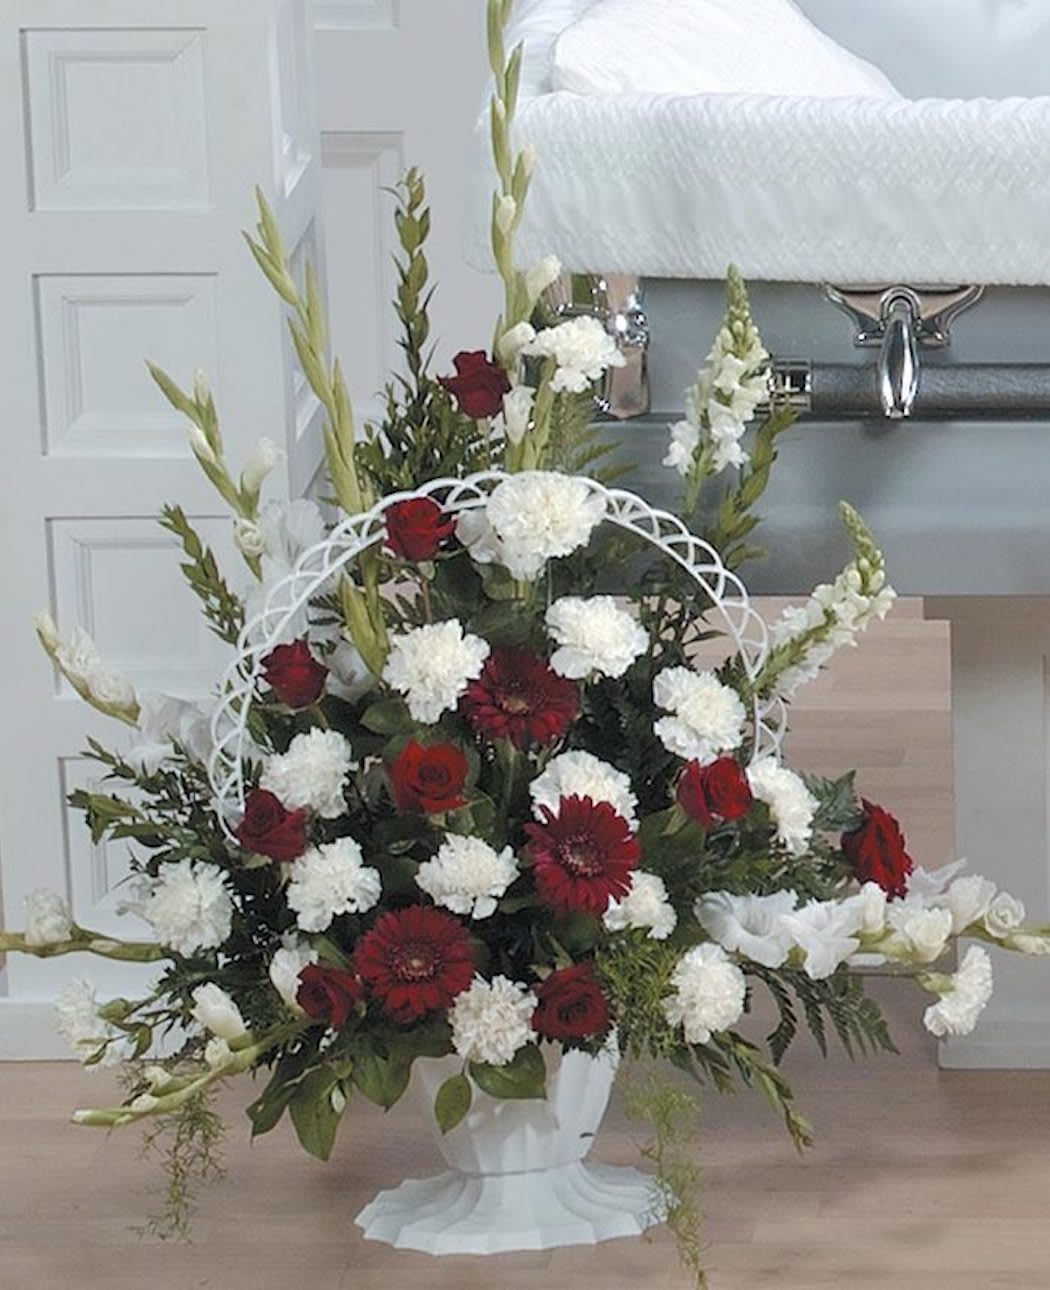 Pure Spirit Garden - A variety of red and white select florals of white Snapdragons, red Gerbera Daises, red Roses, white Carnations and white Gladiolus create a vibrant fluted basket garden.